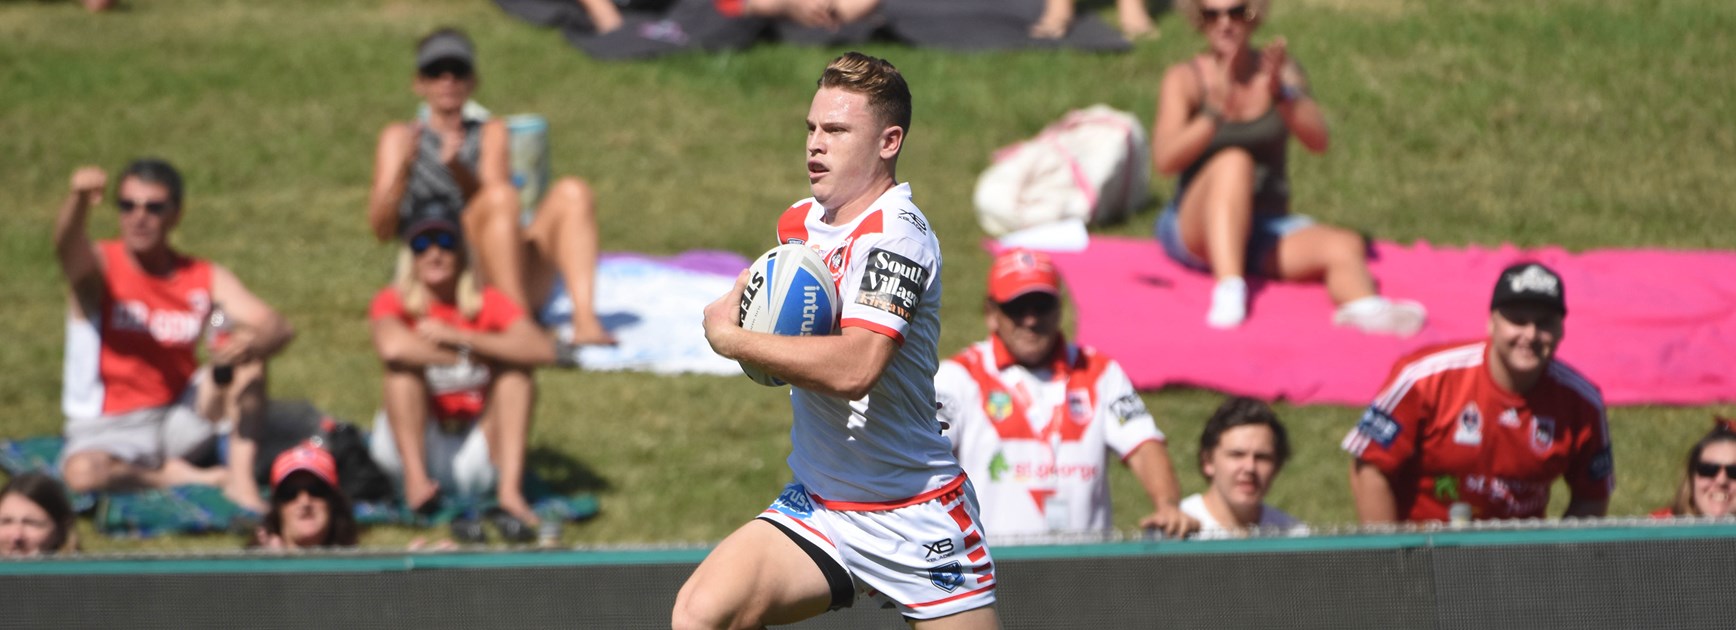 ISP team: Round 20 v Wyong Roos